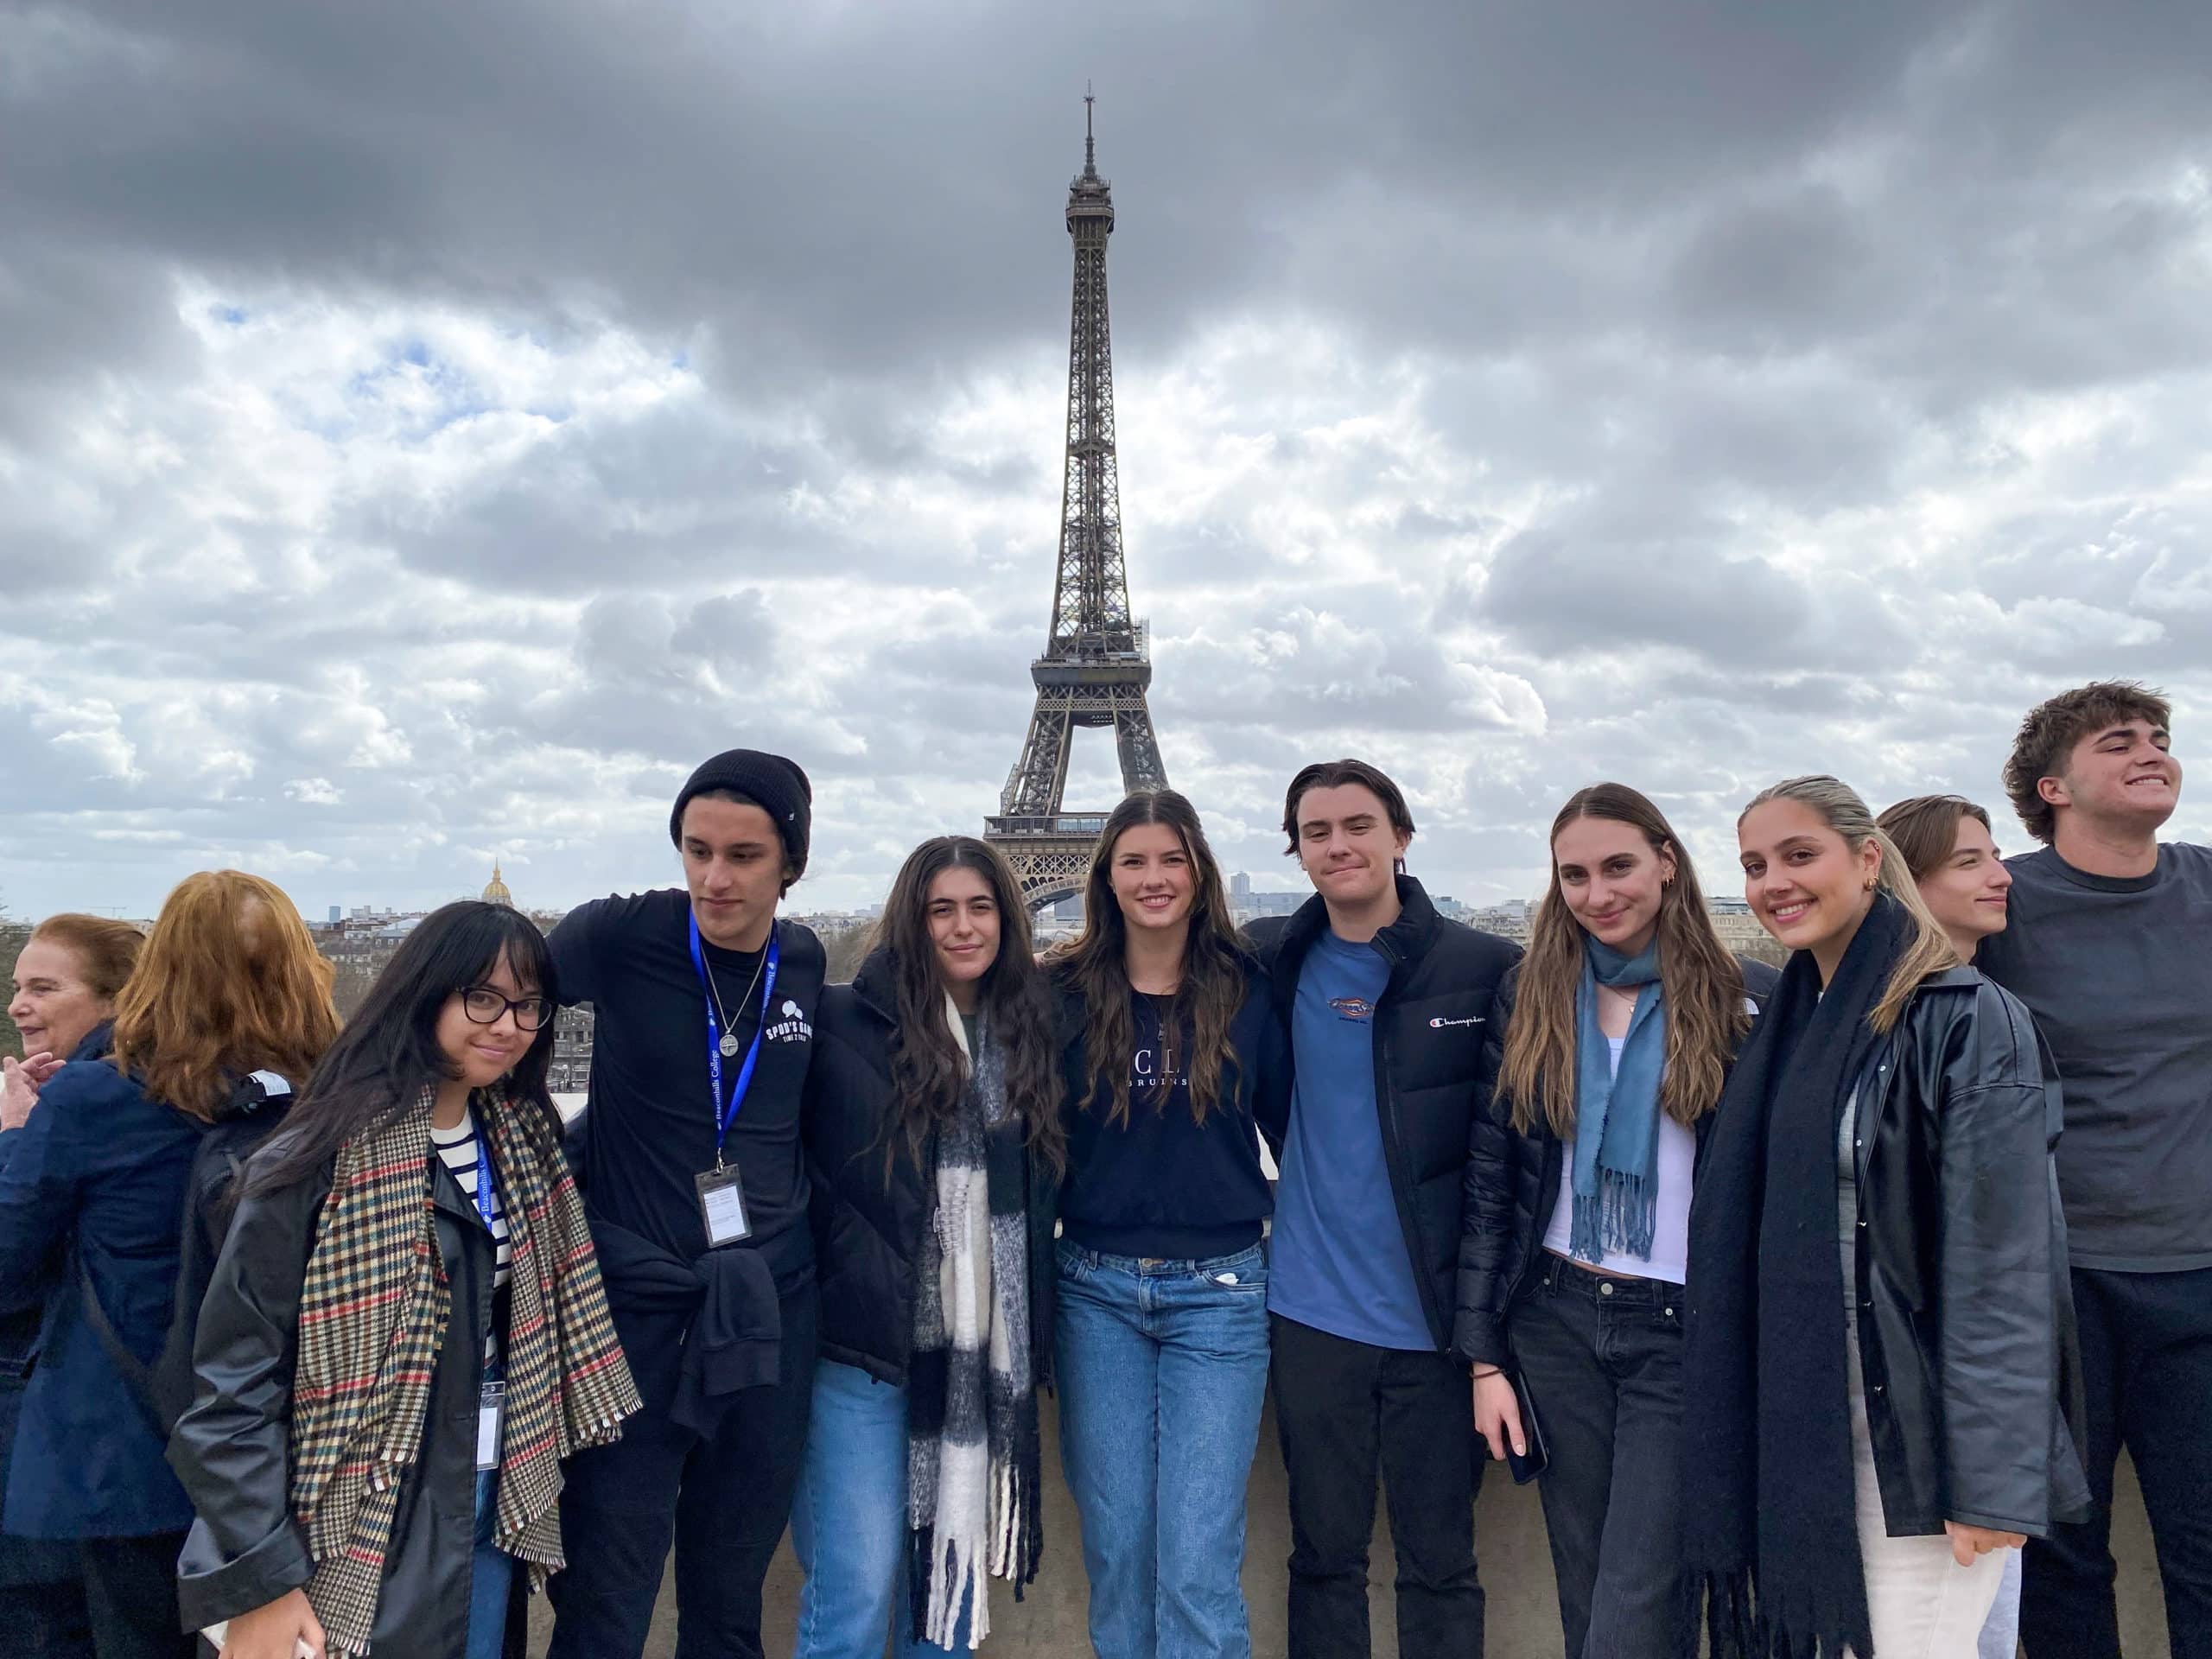 A group of Beaconhills students standing in front of the Eiffel Tower.